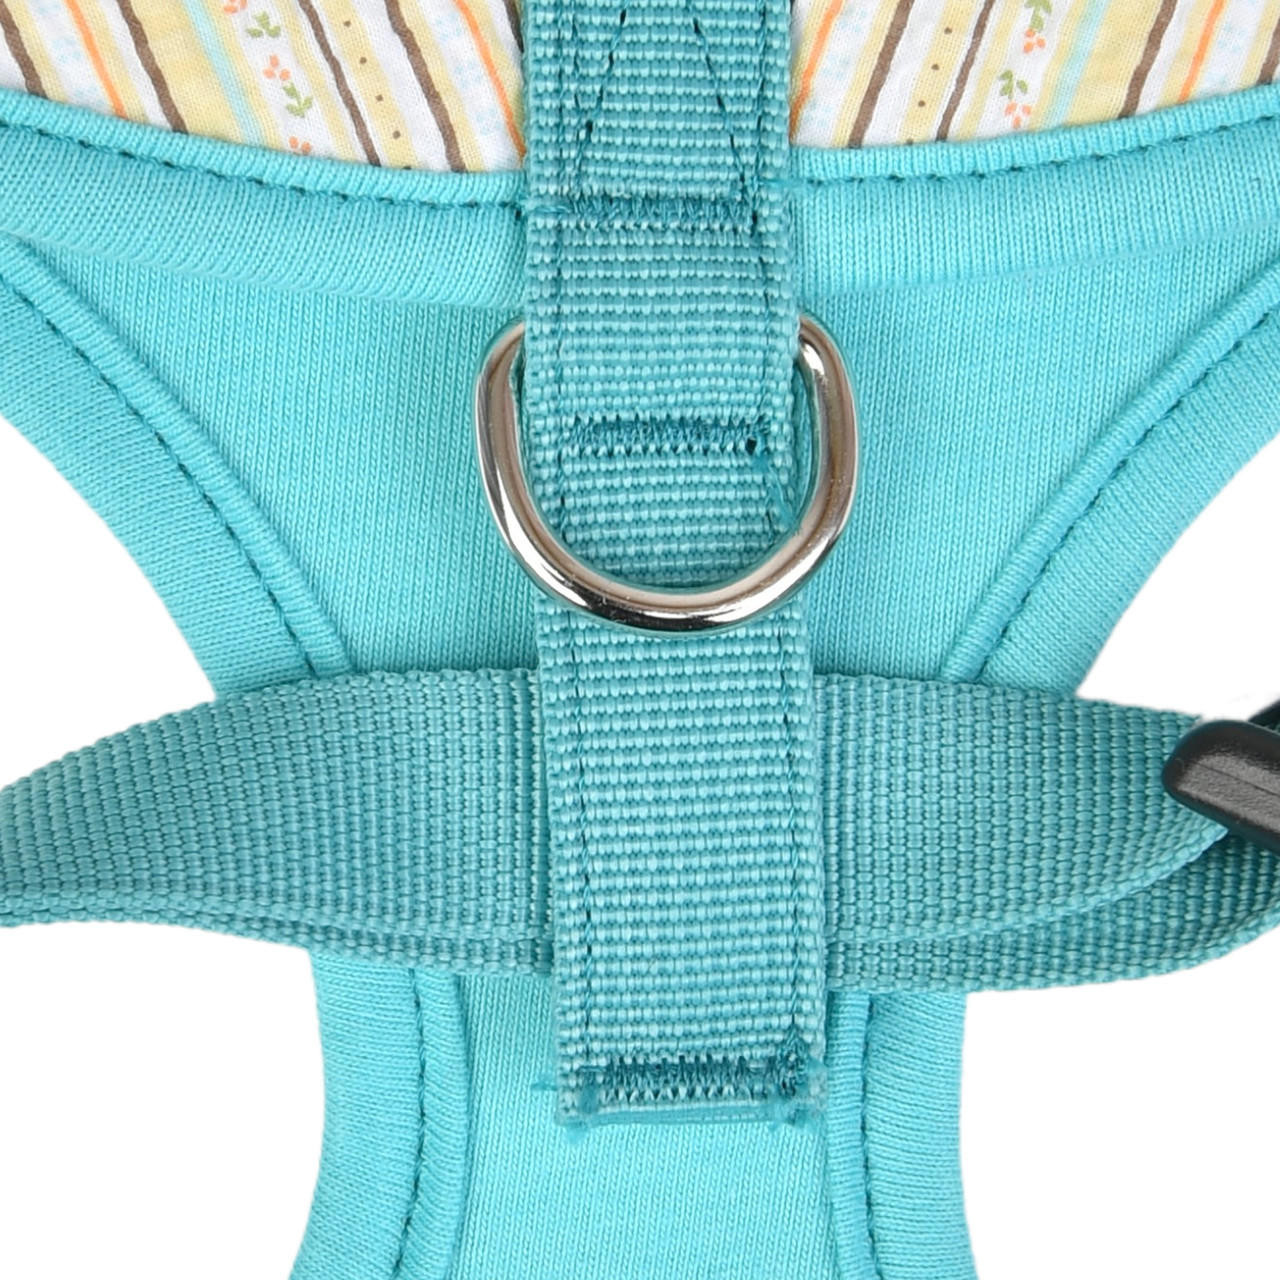 Puppia/Pinkaholic Pinkaholic Joie Harness (by Puppia) 